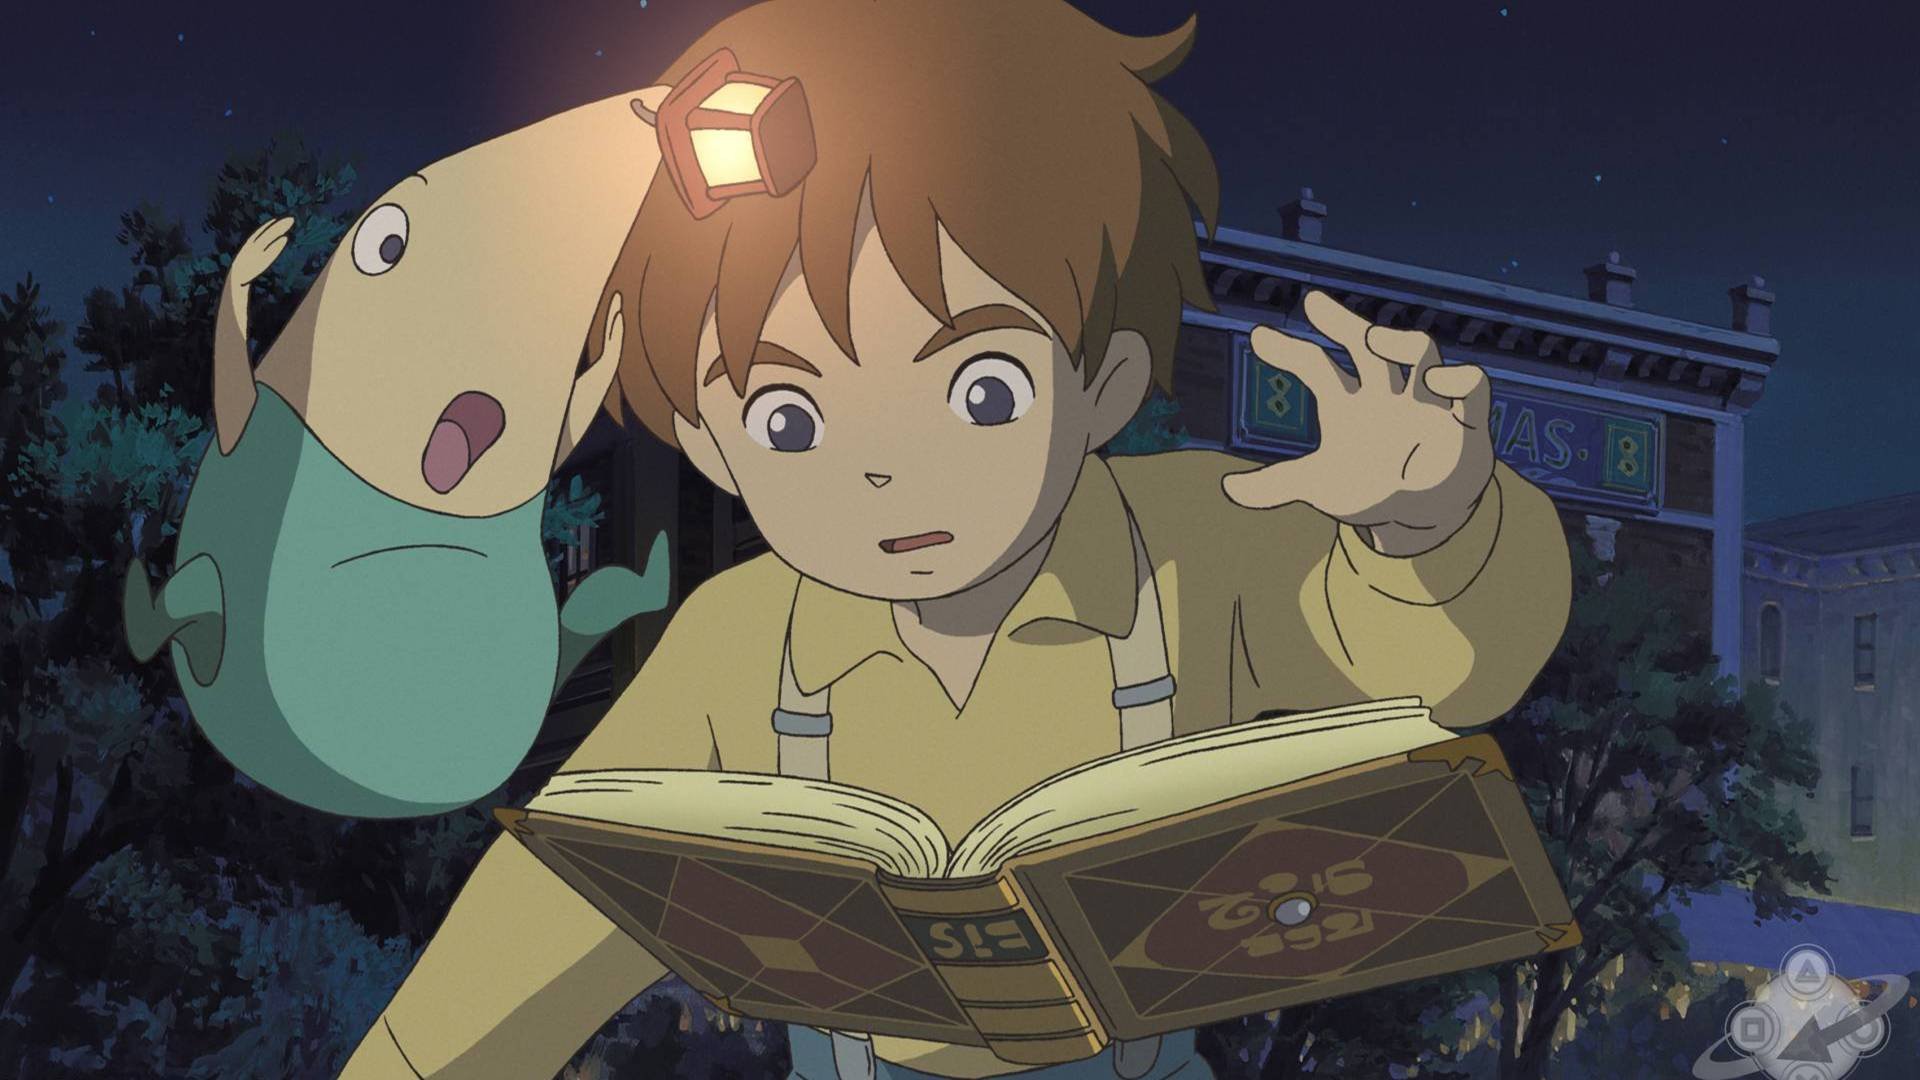 E3 2019: Ni no Kuni: Wrath of the White Witch Remastered Leaks, Coming